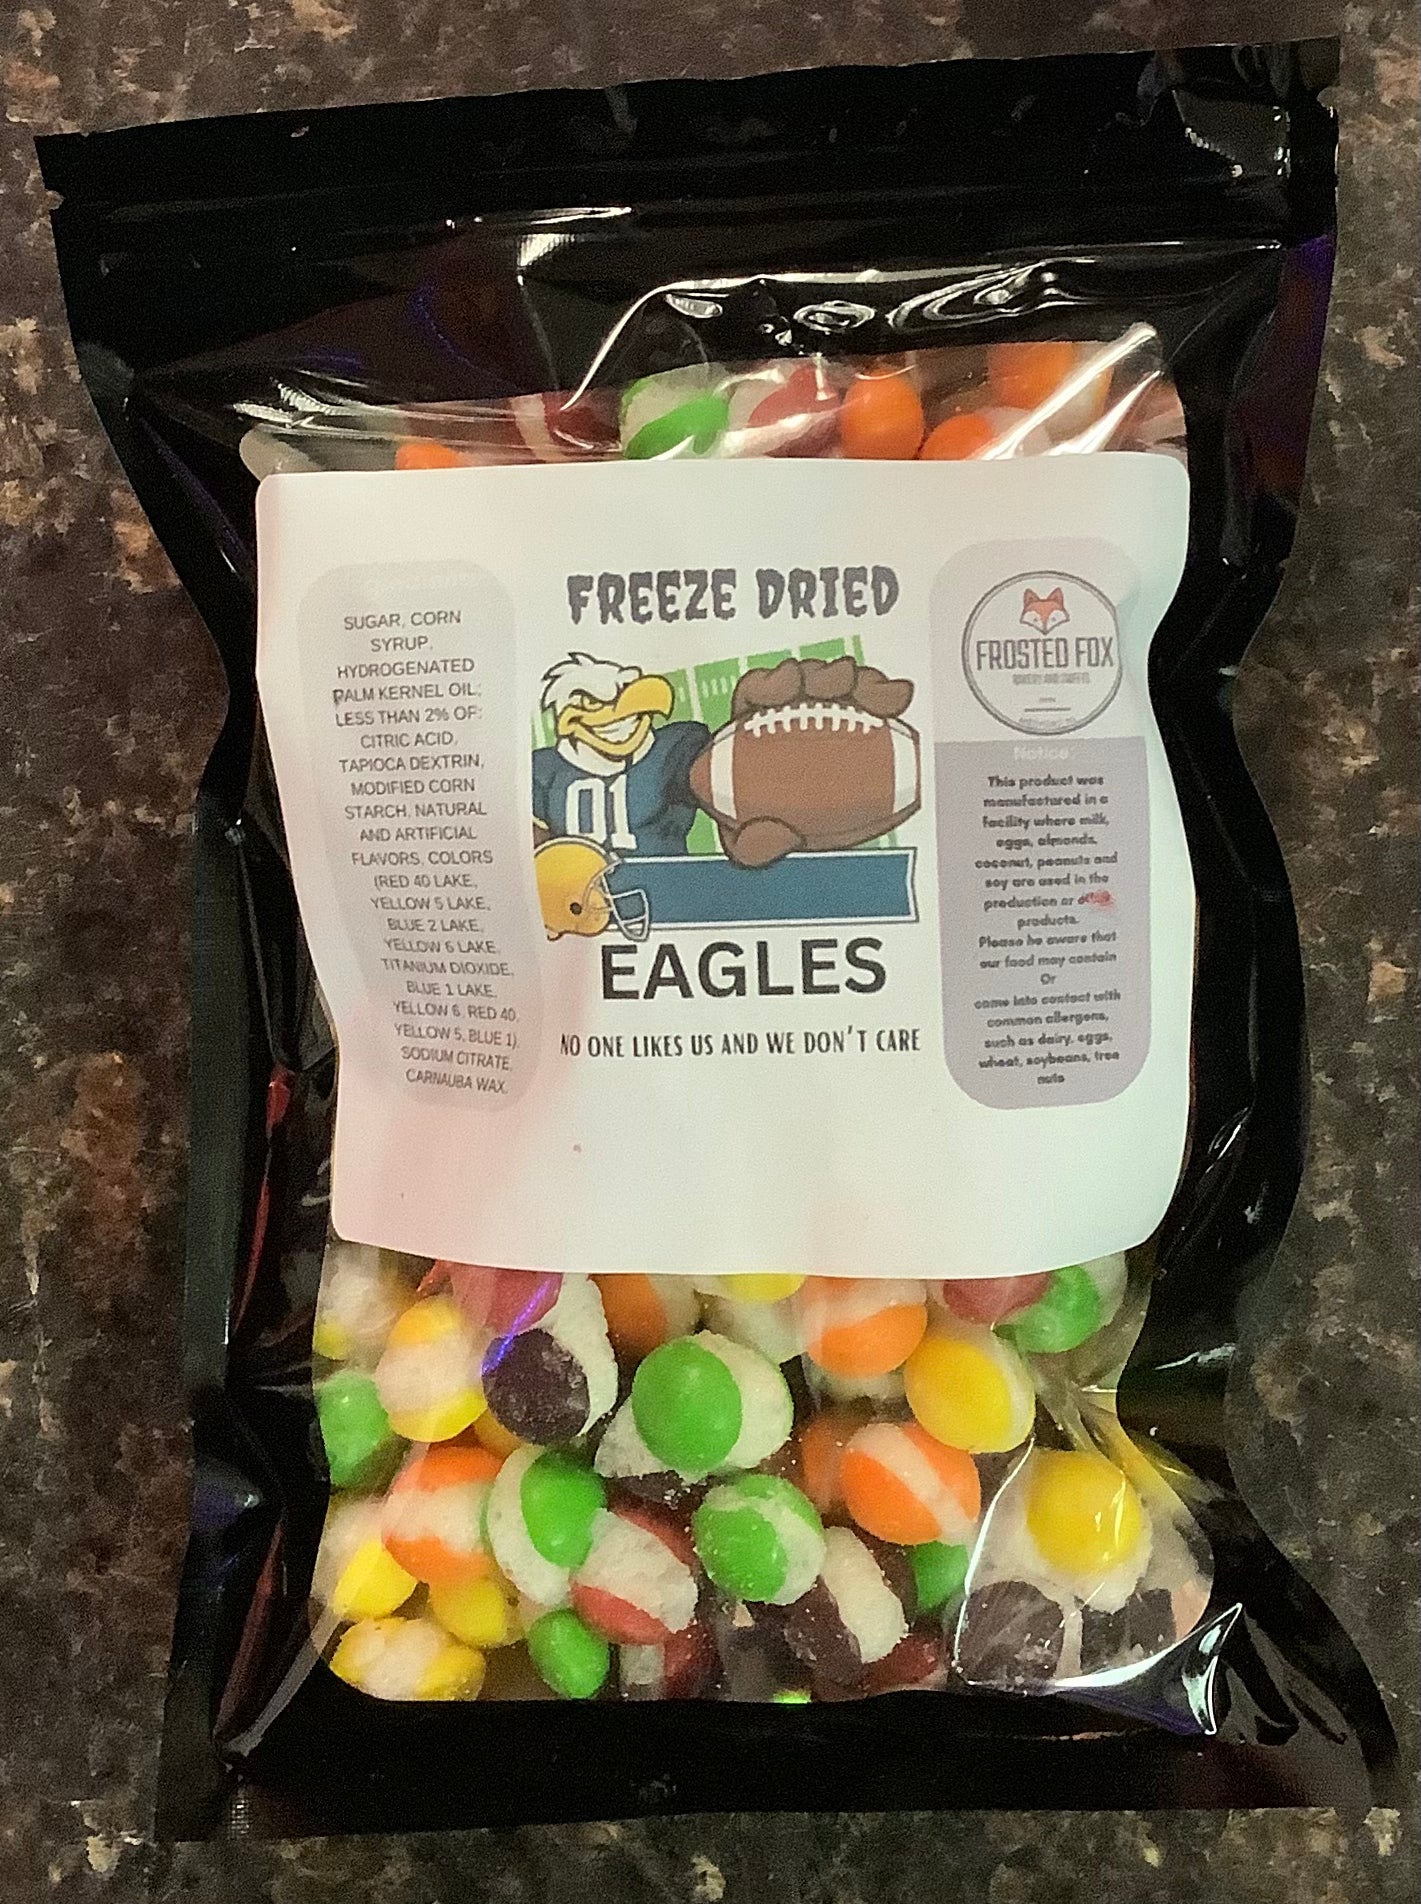 Freeze Dried Eagles by Frosted Fox